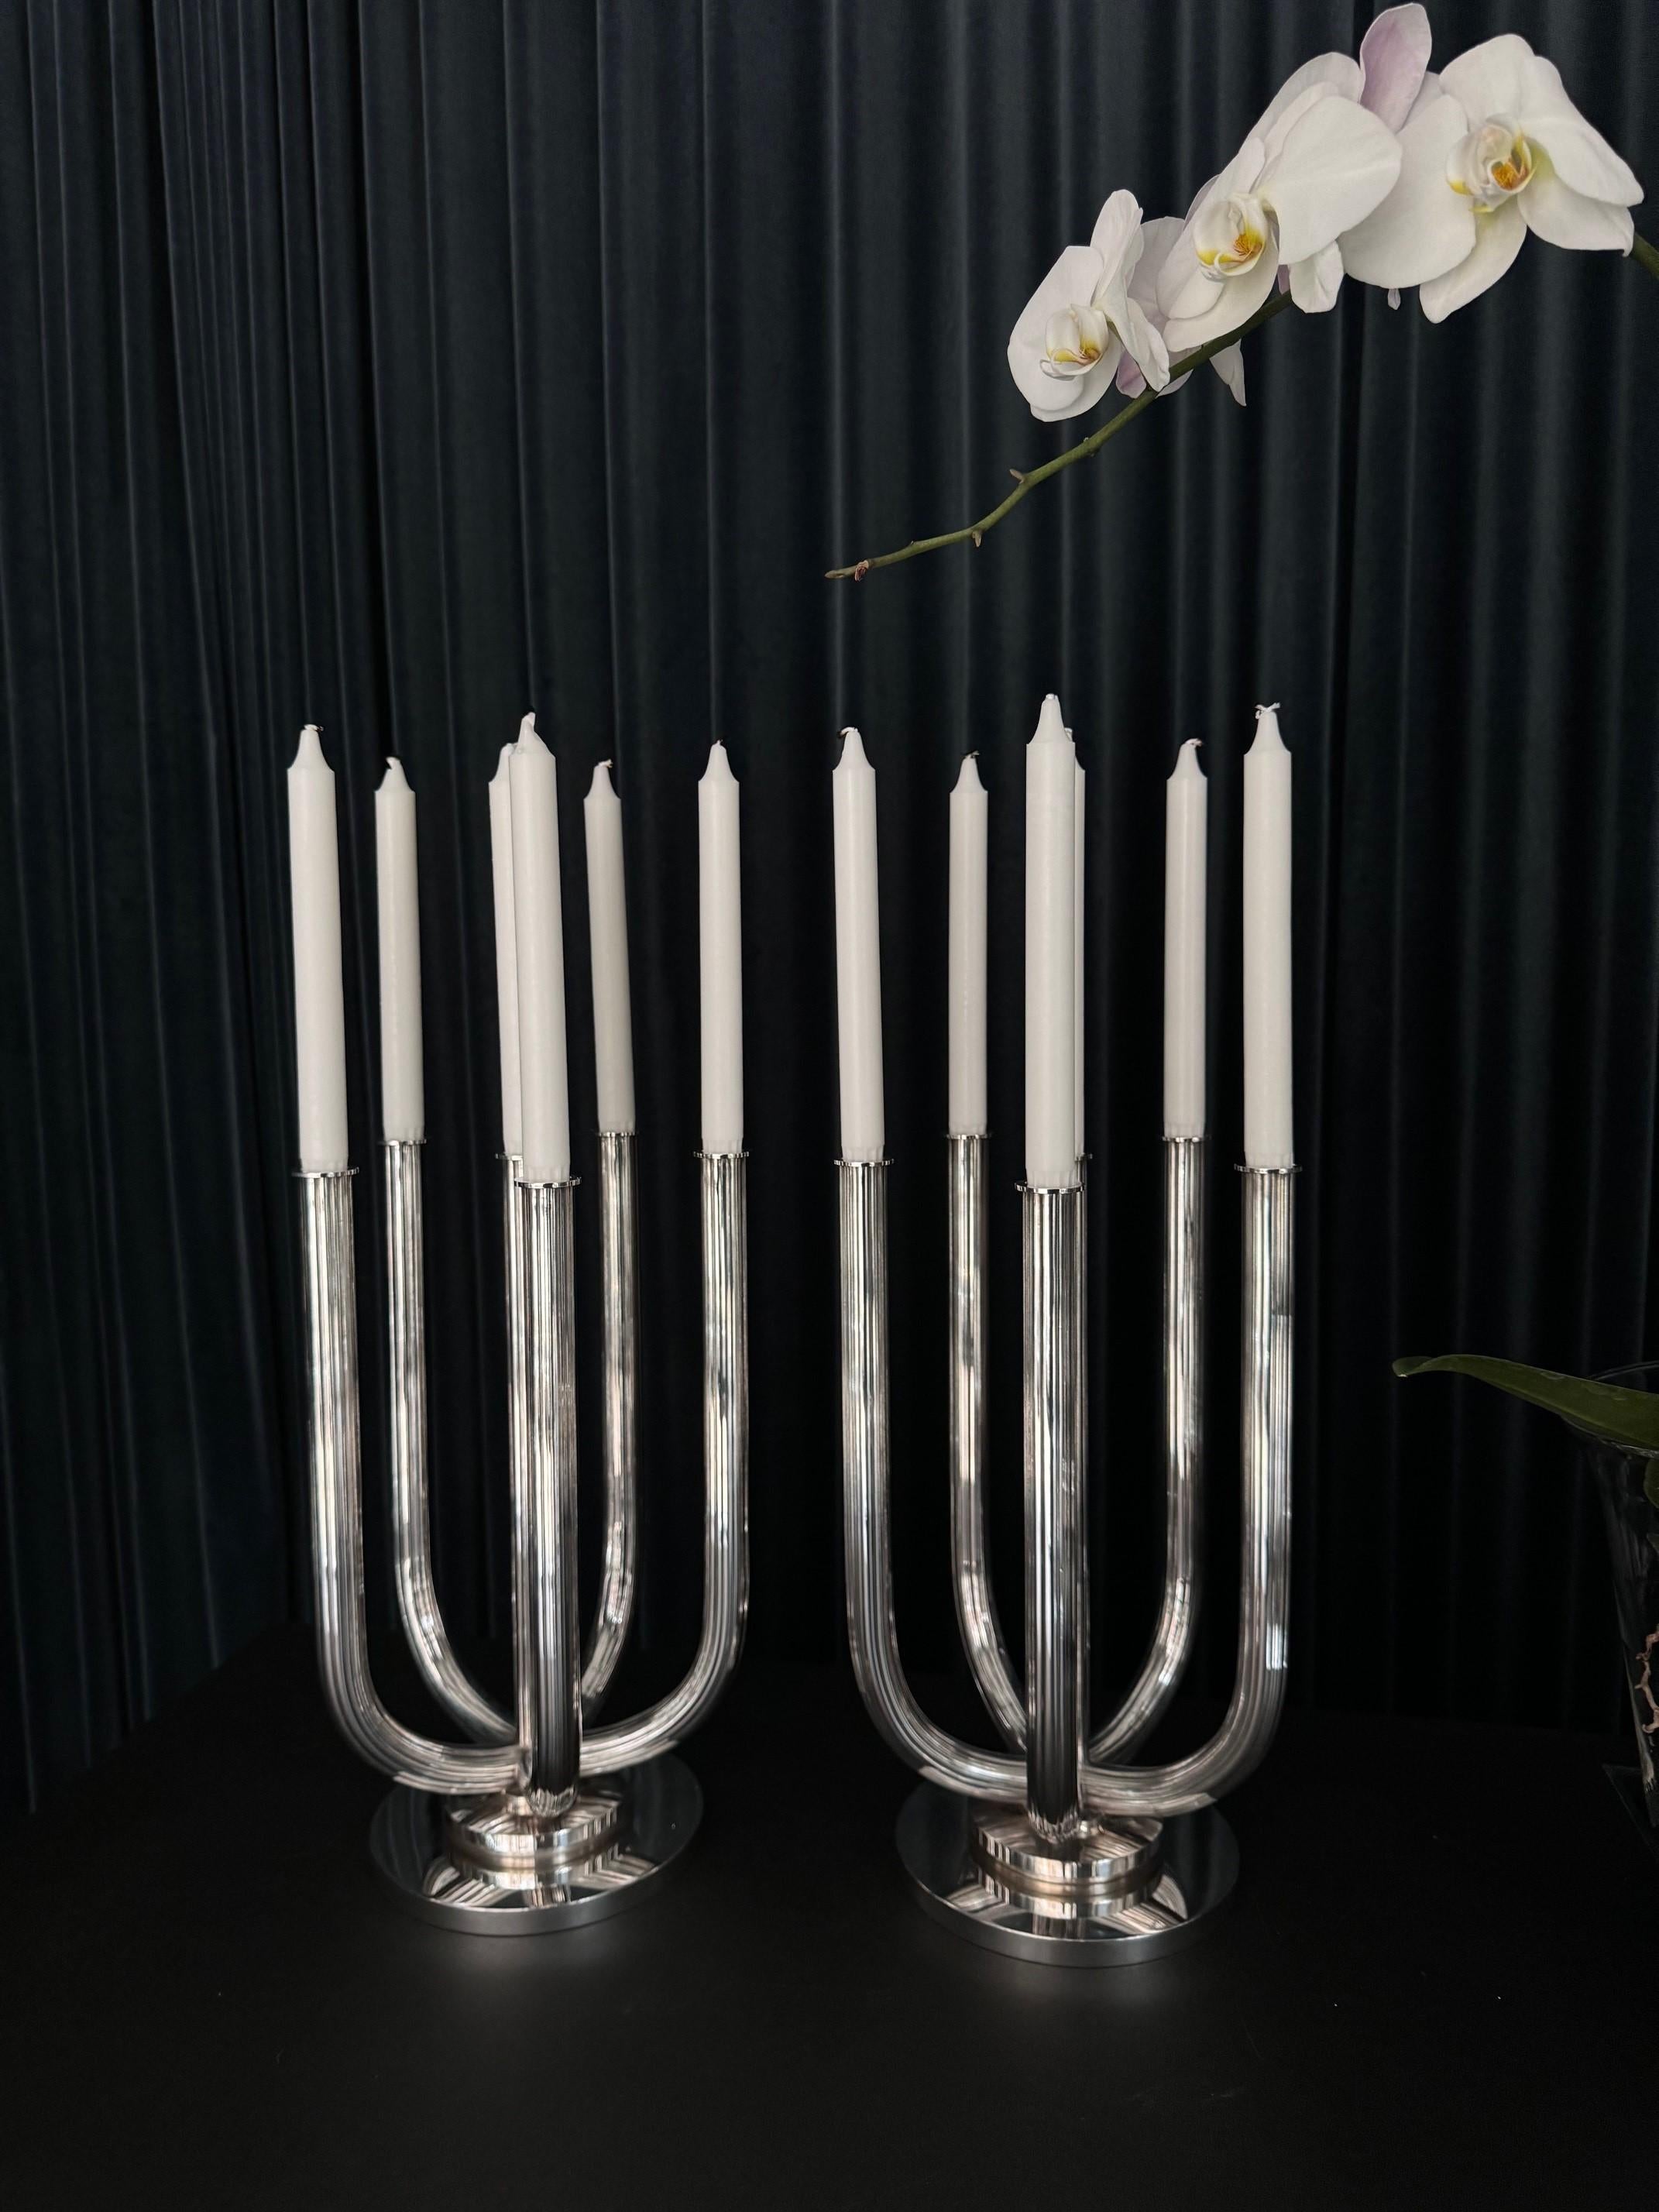 A pair of vintage monumental candelabra from Georg Jensen, model #751, designed by Harald Nielsen in 1935. These exquisite pieces feature an oversized disk-shaped raised base with a centered smaller disk. The six tubular arms showcase a meticulously